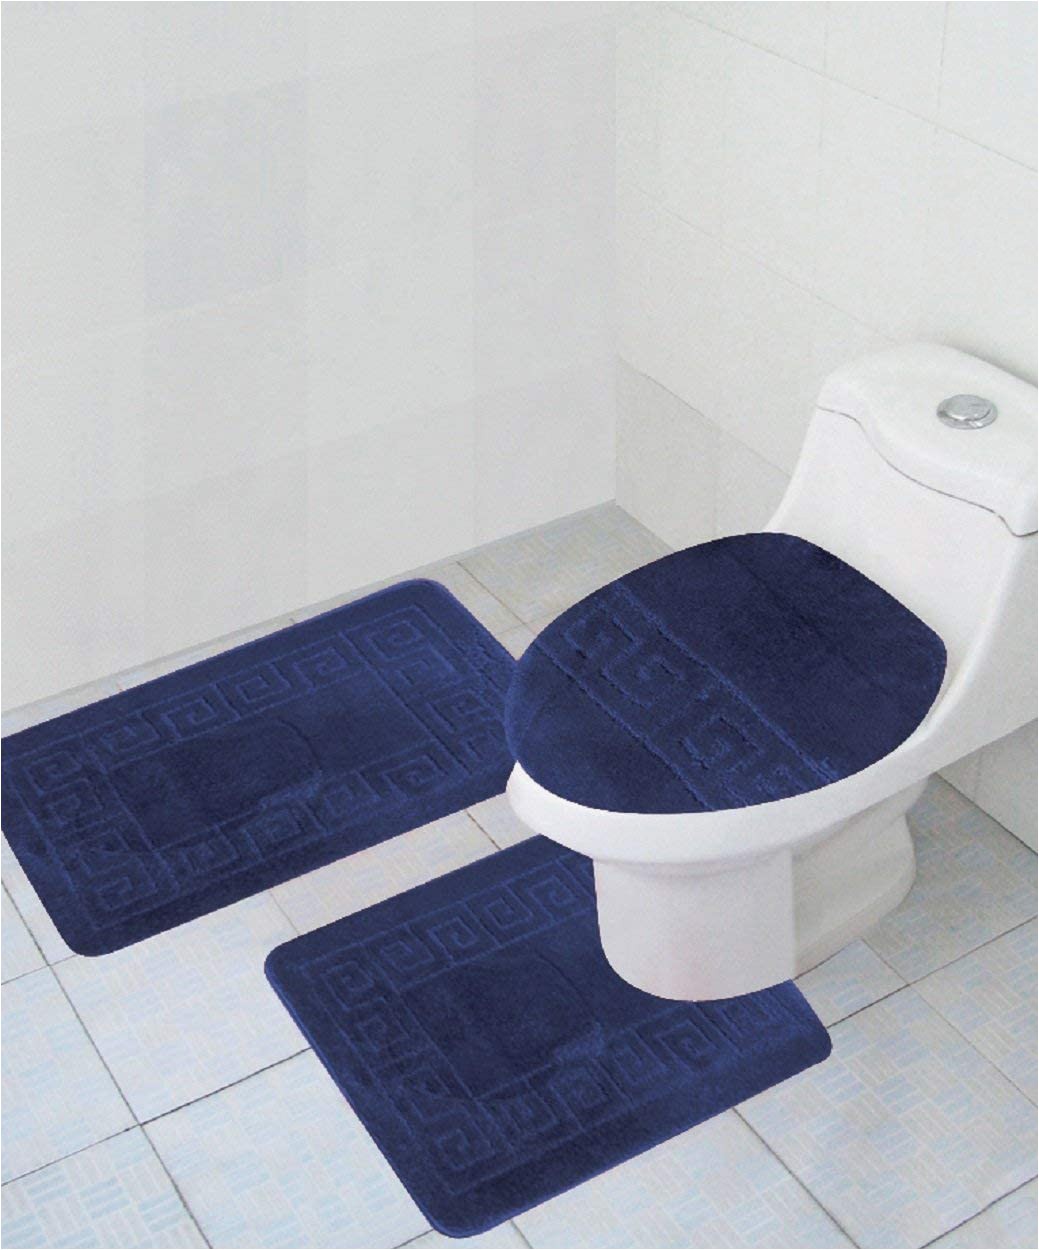 Bathroom Rug Sets with Elongated Lid Cover 3 Piece Bath Rug Set Pattern Bathroom Rug 20"x32" Contour Mat 20"x20" with Lid Cover Sky Blue